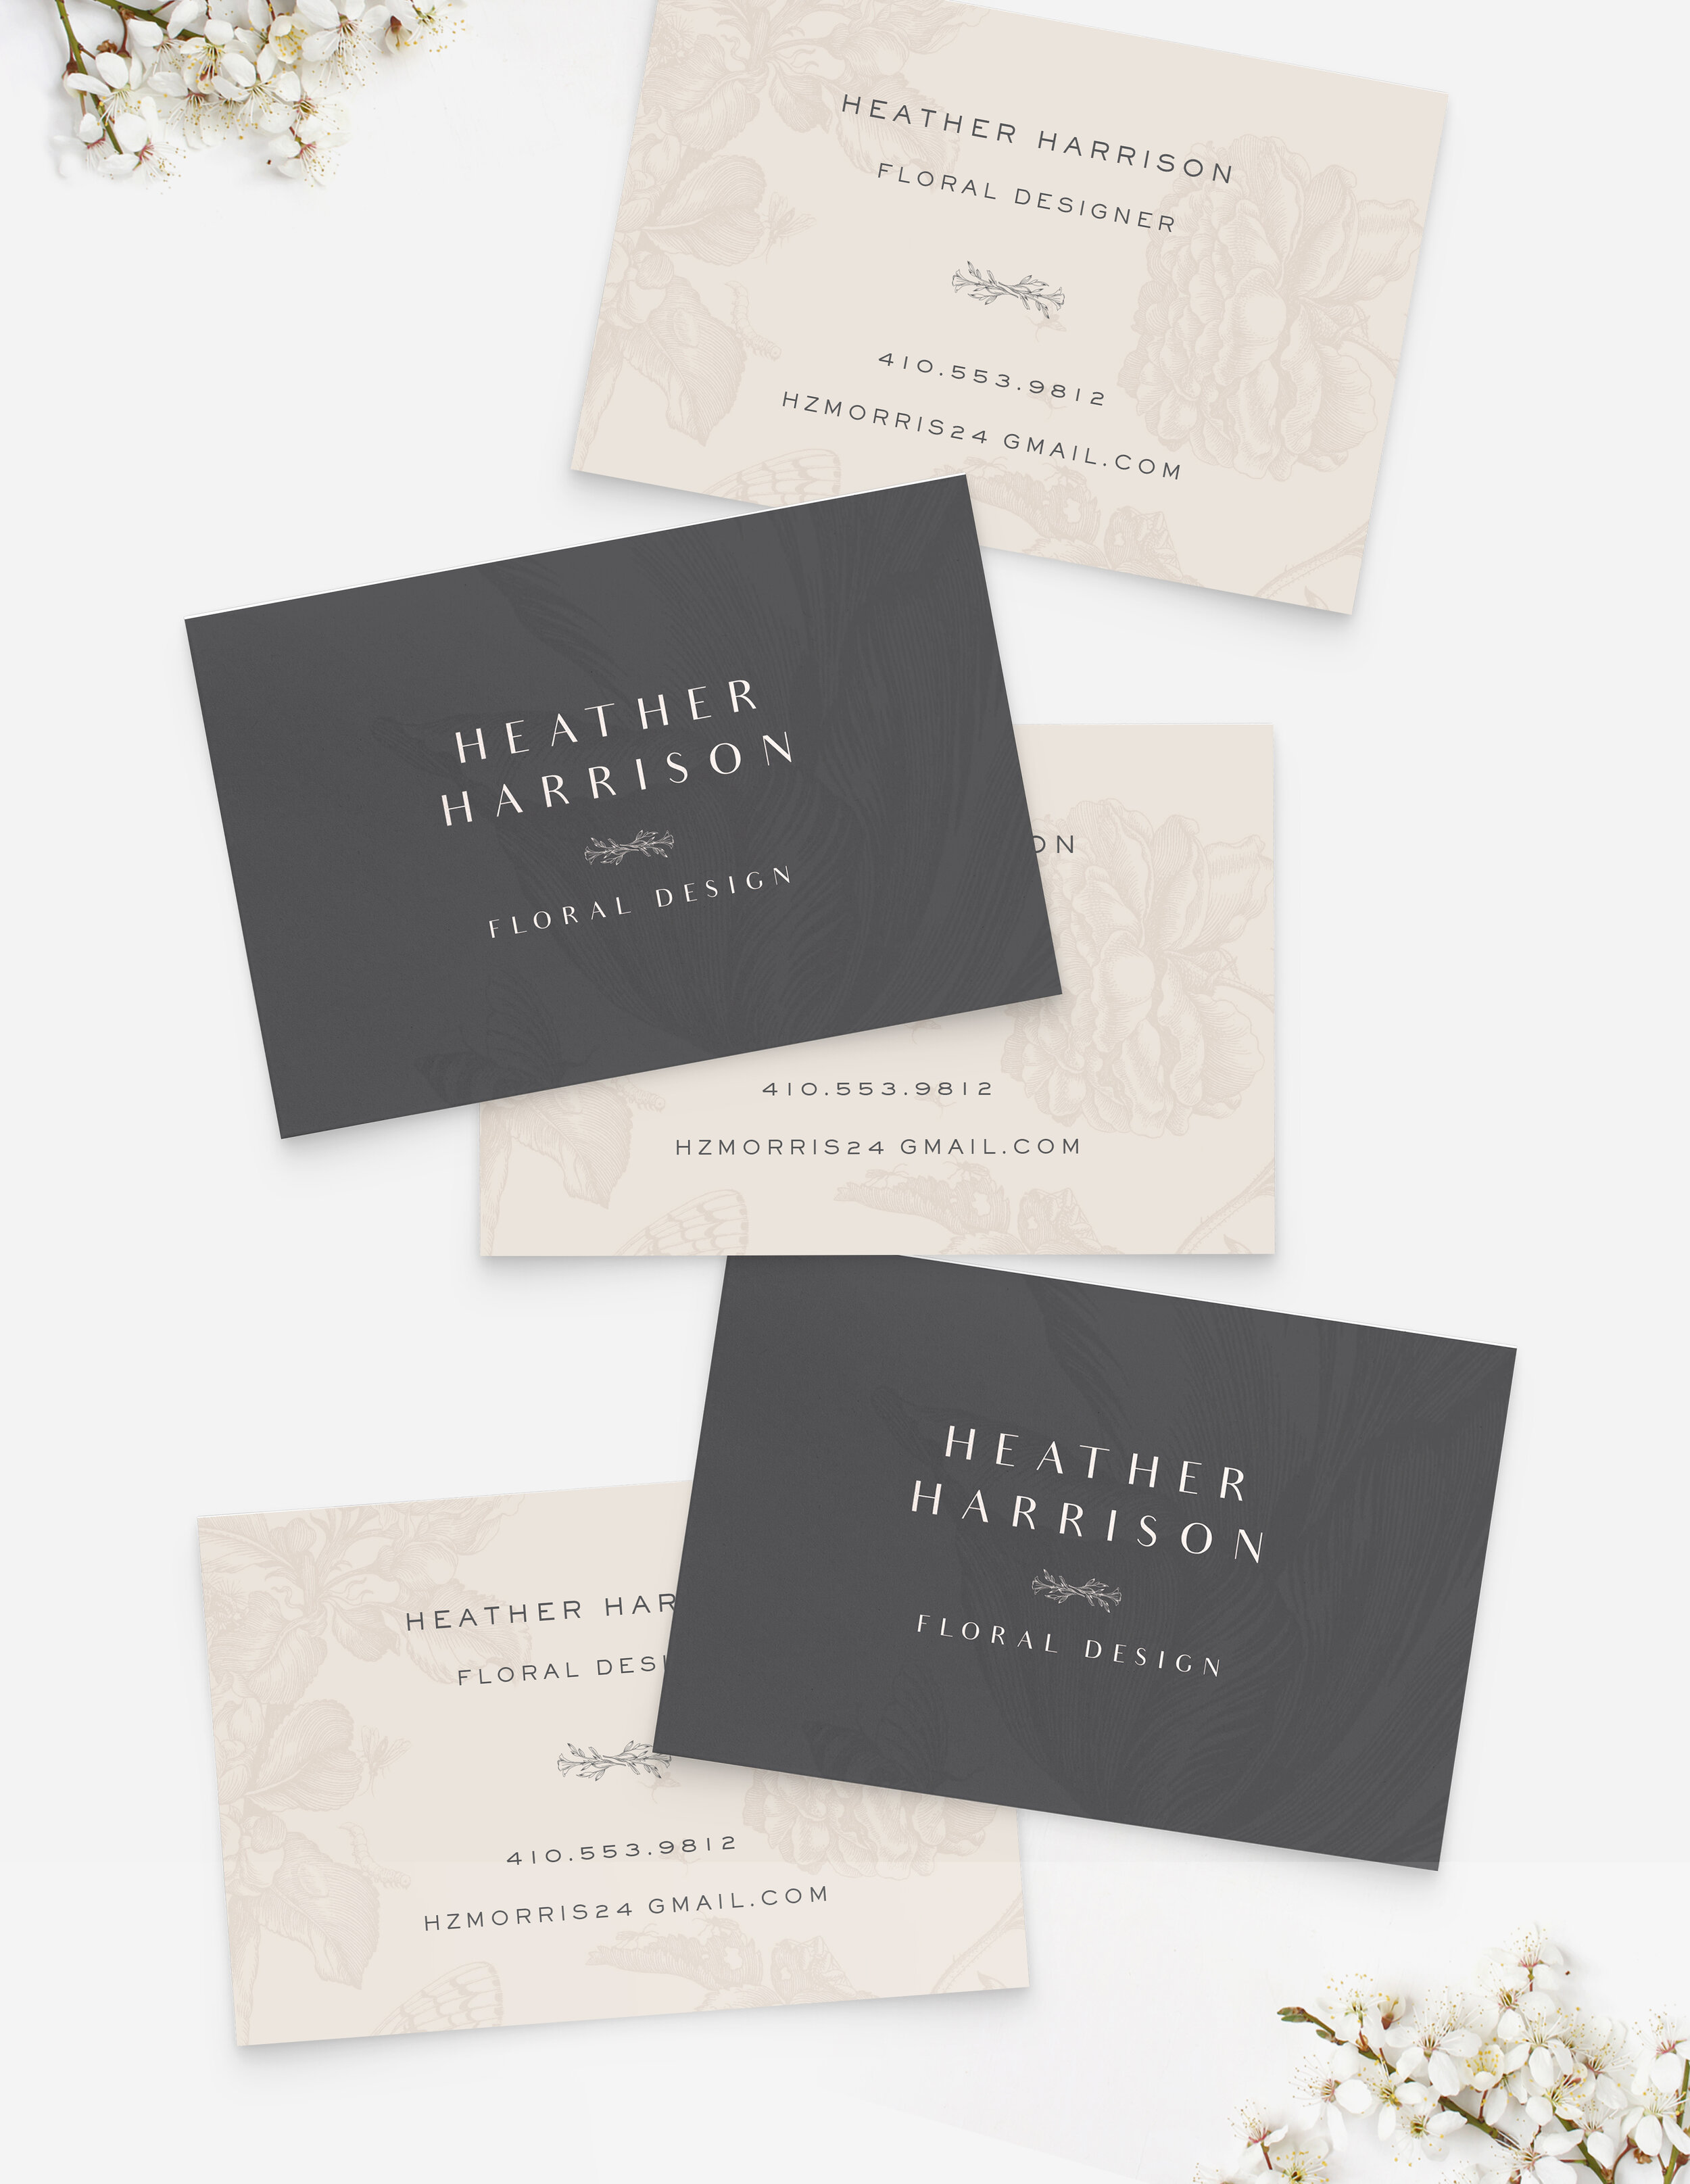 Sophisticated Blush and Charcoal Floral Business Card Design by The Artful Union